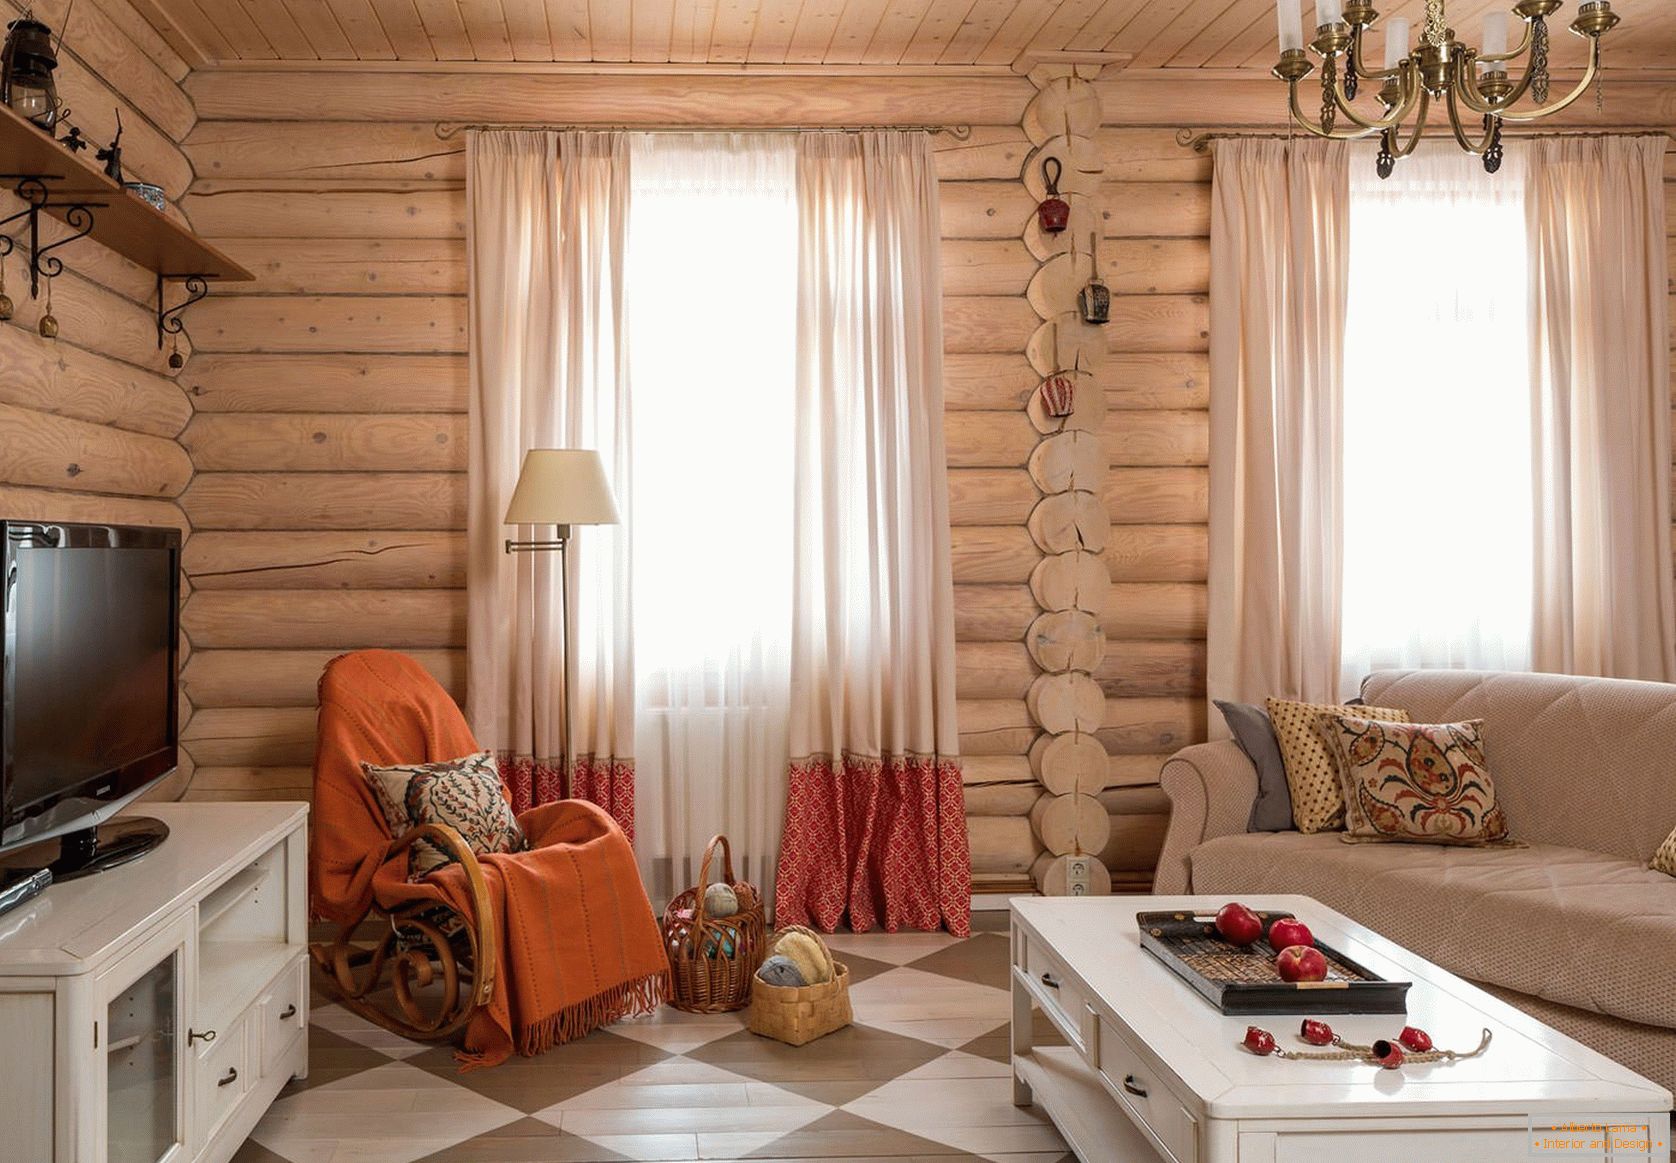 Stile country all'interno